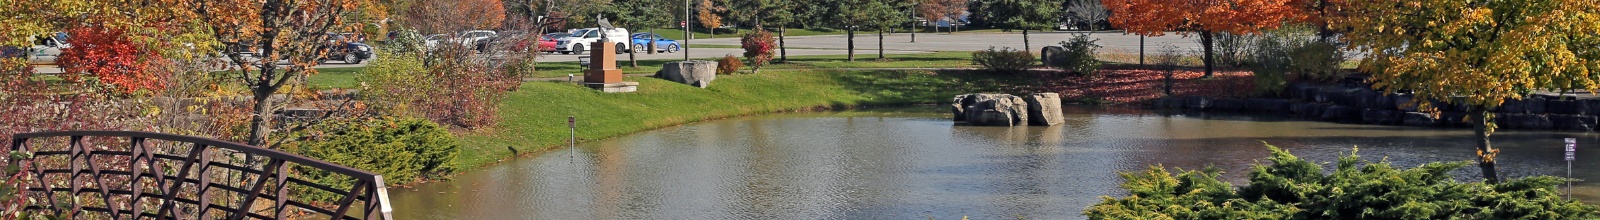 A pond in a clean cut park in the fall